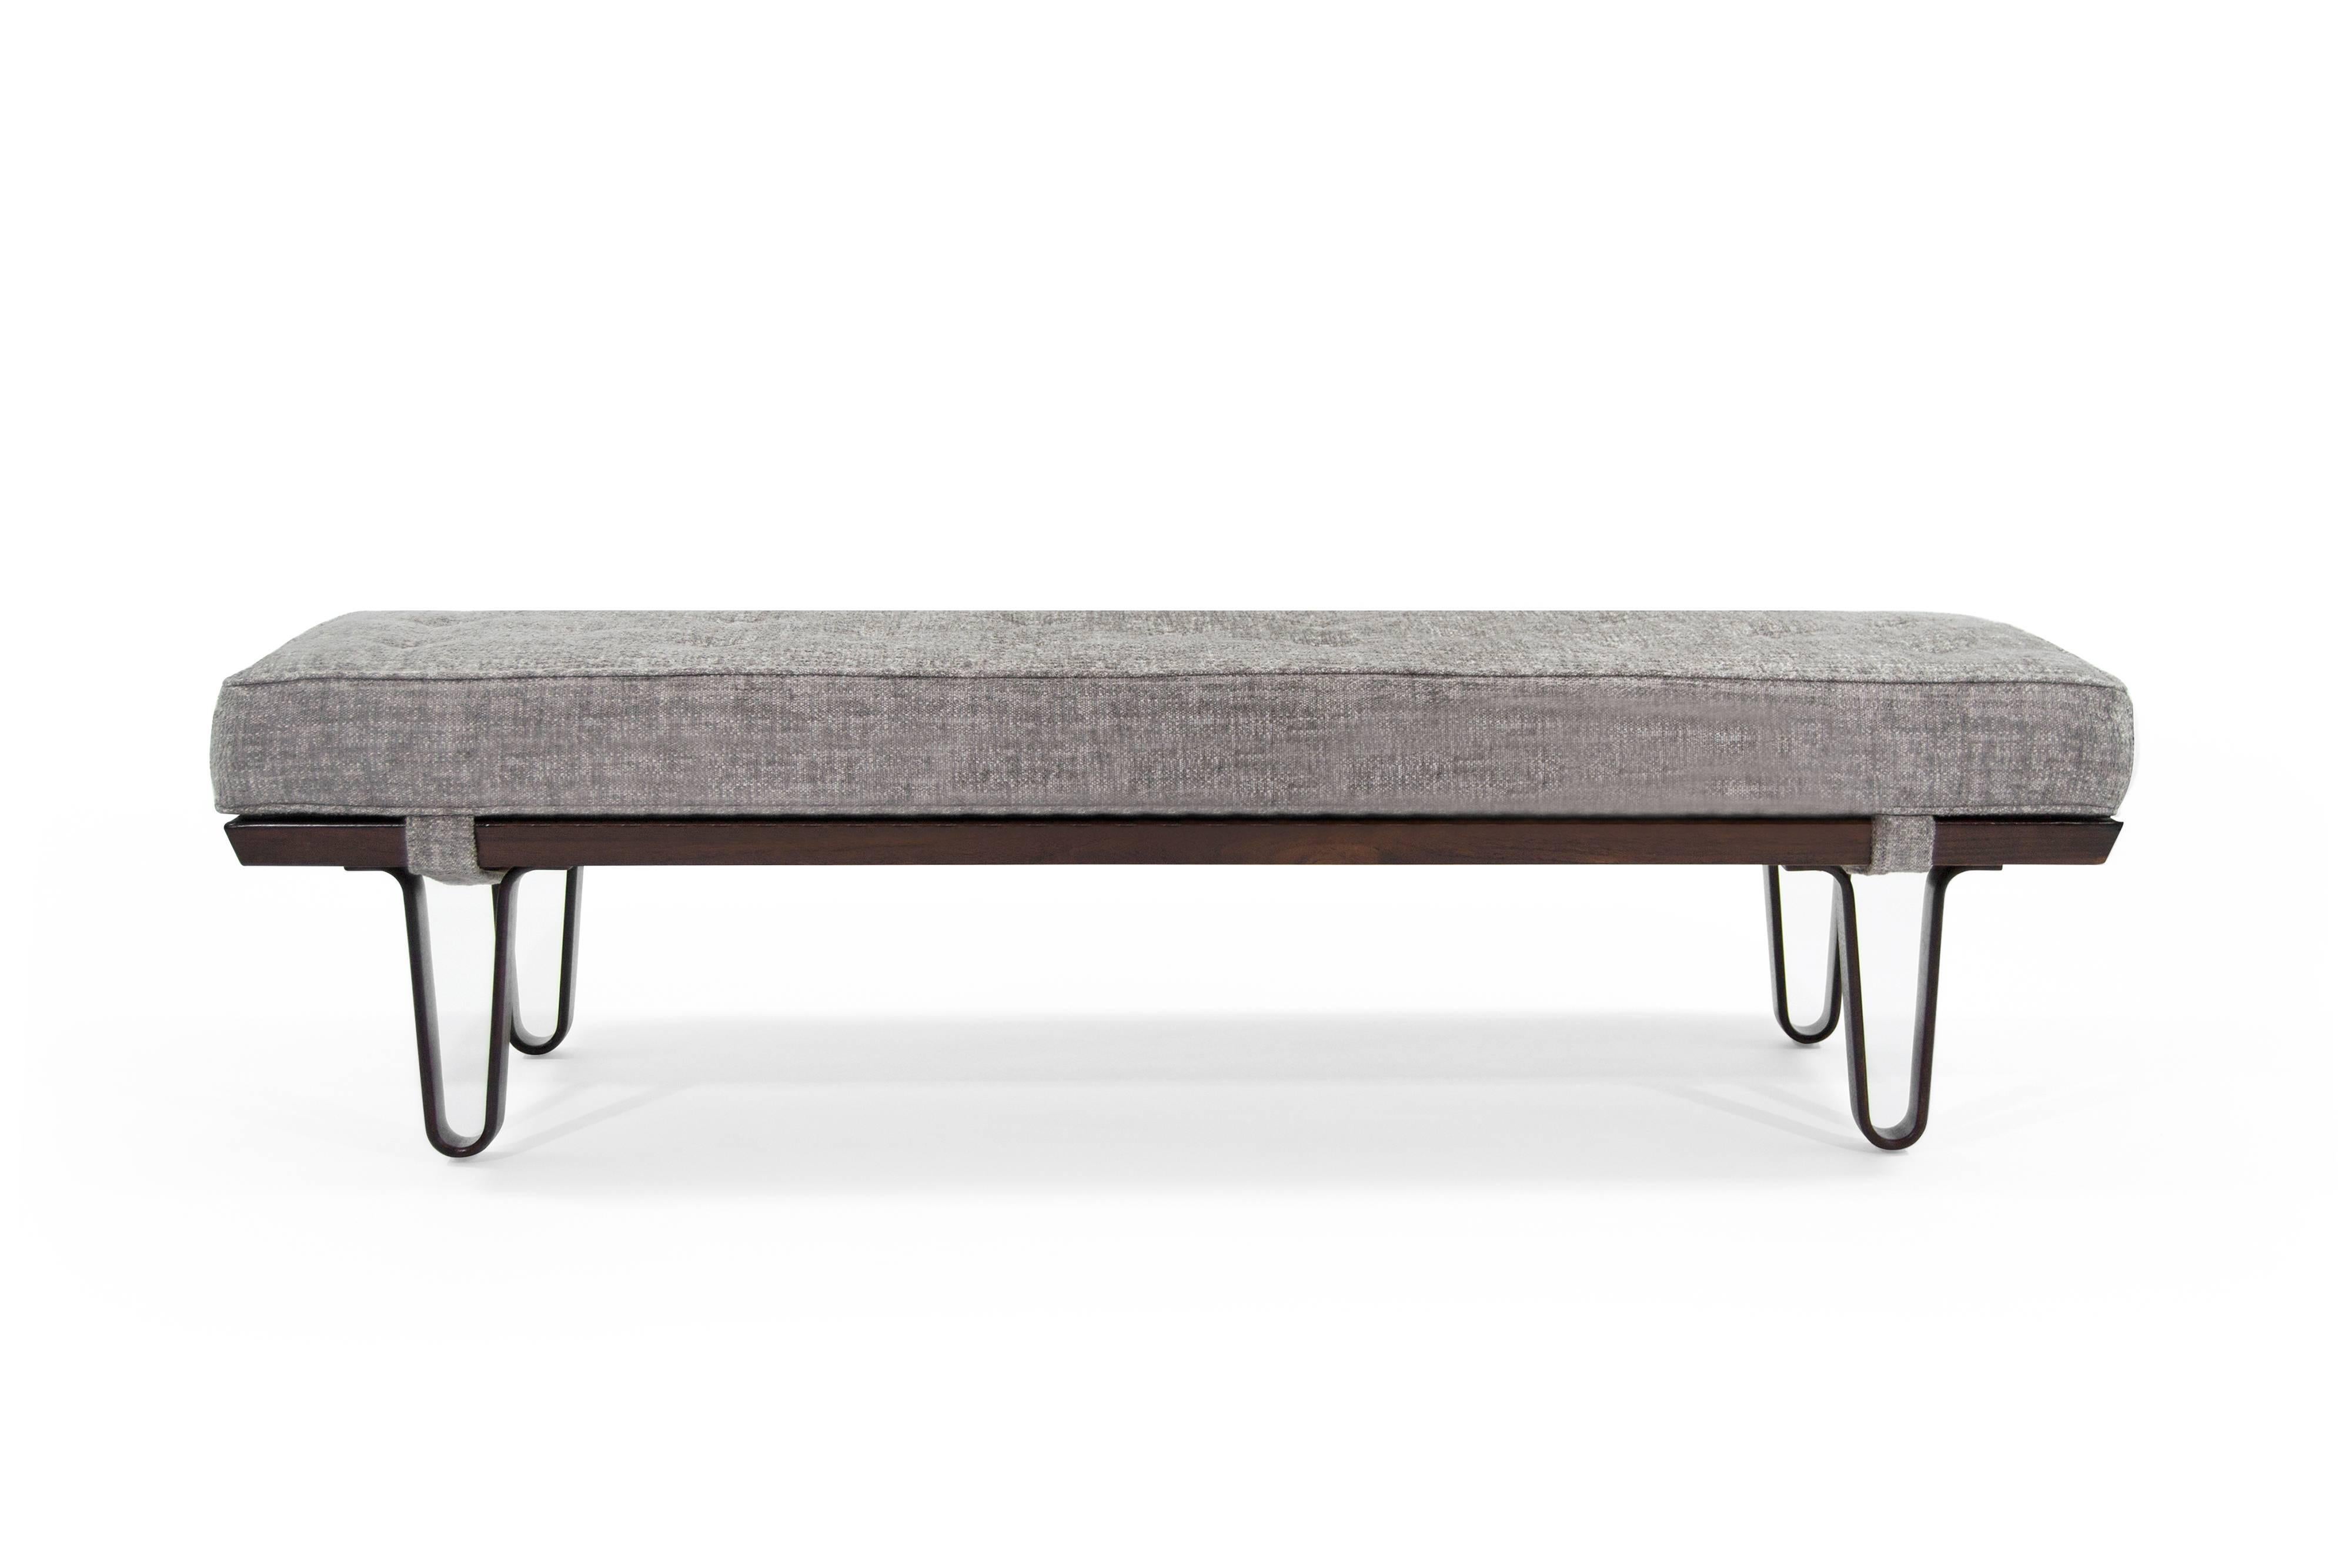 Bench or coffee table dubbed the 